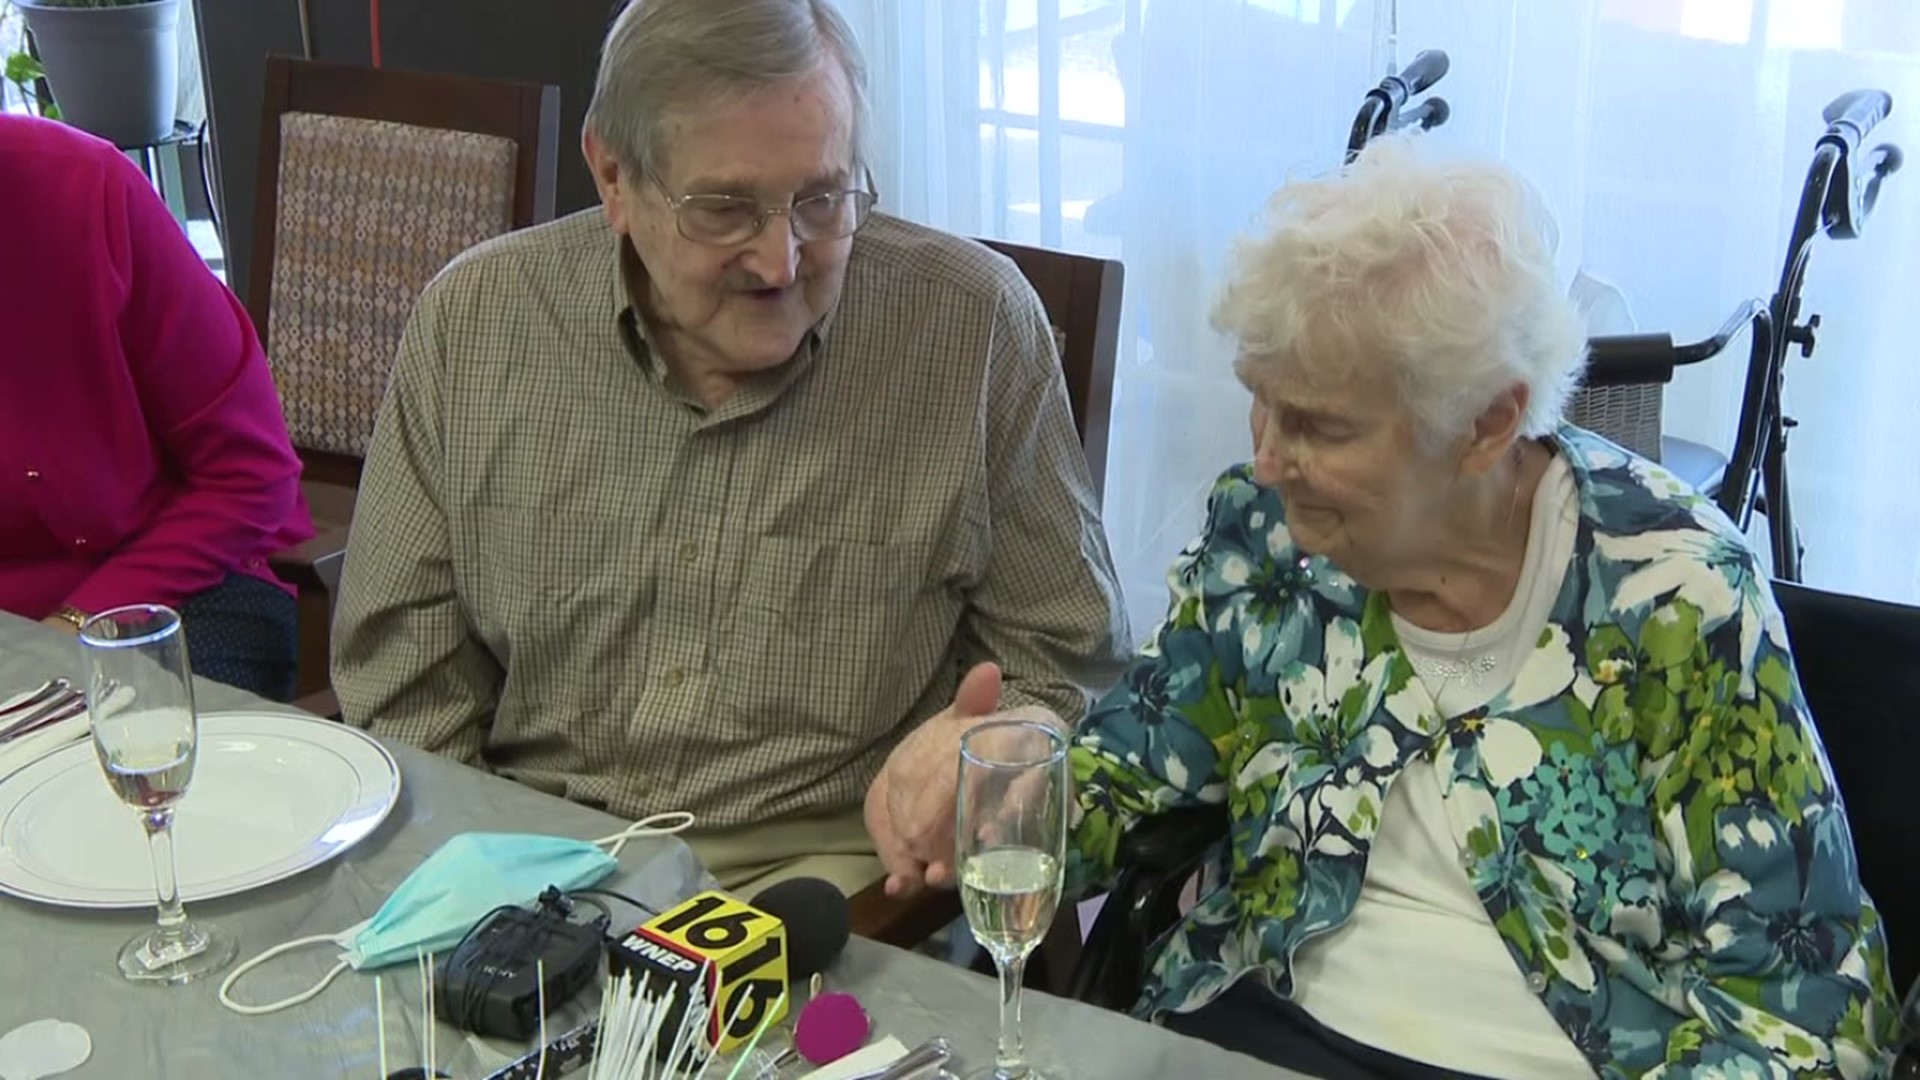 Leon and Rosemary Krushinskie reached a big milestone on Wednesday: their 70th anniversary.